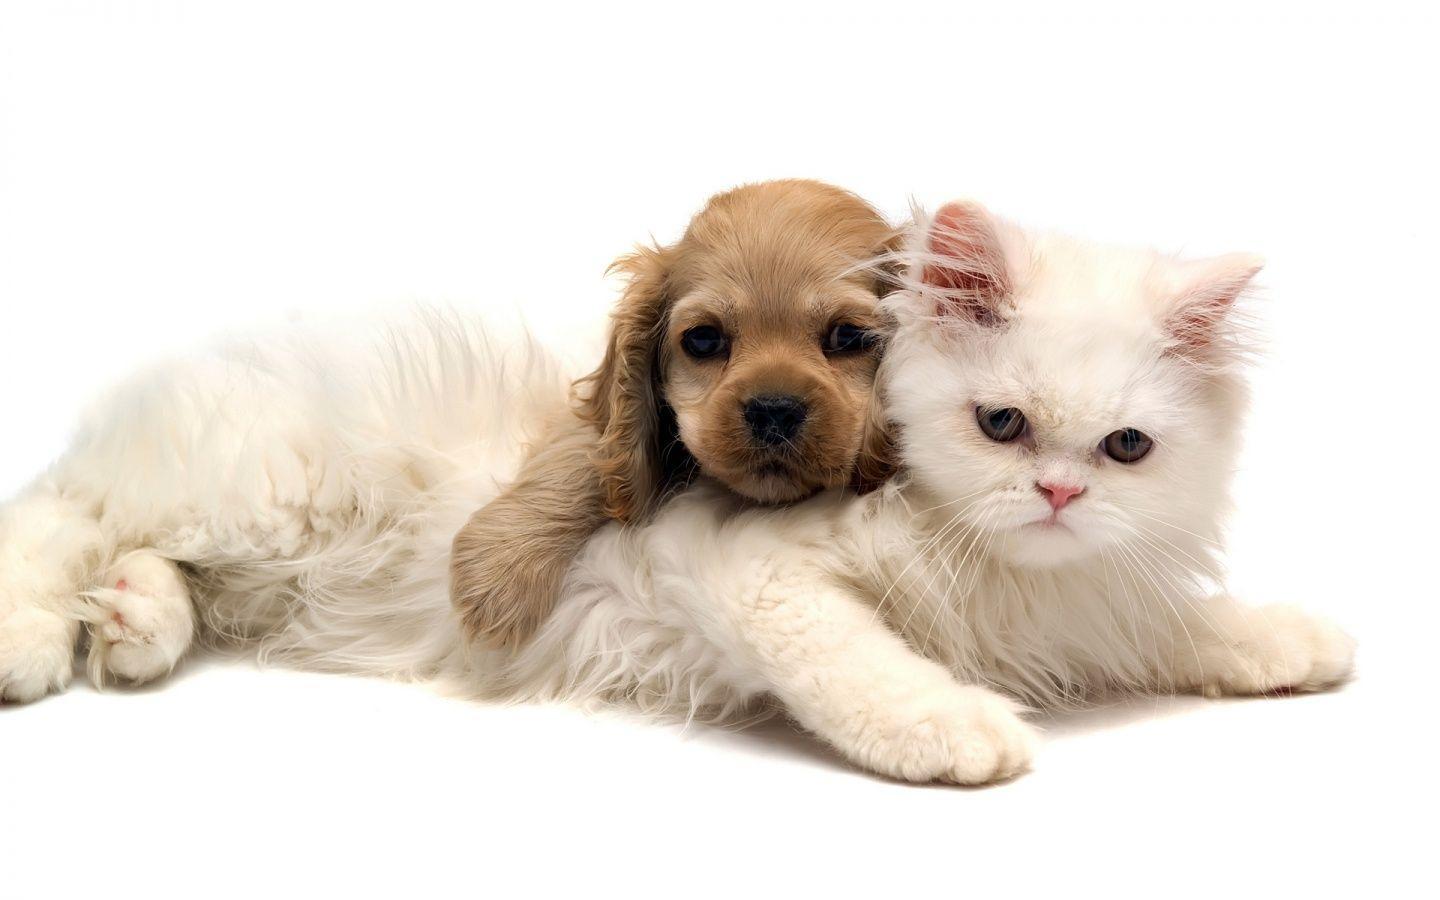 Wallpaper For > Cute Dog And Cat Wallpaper